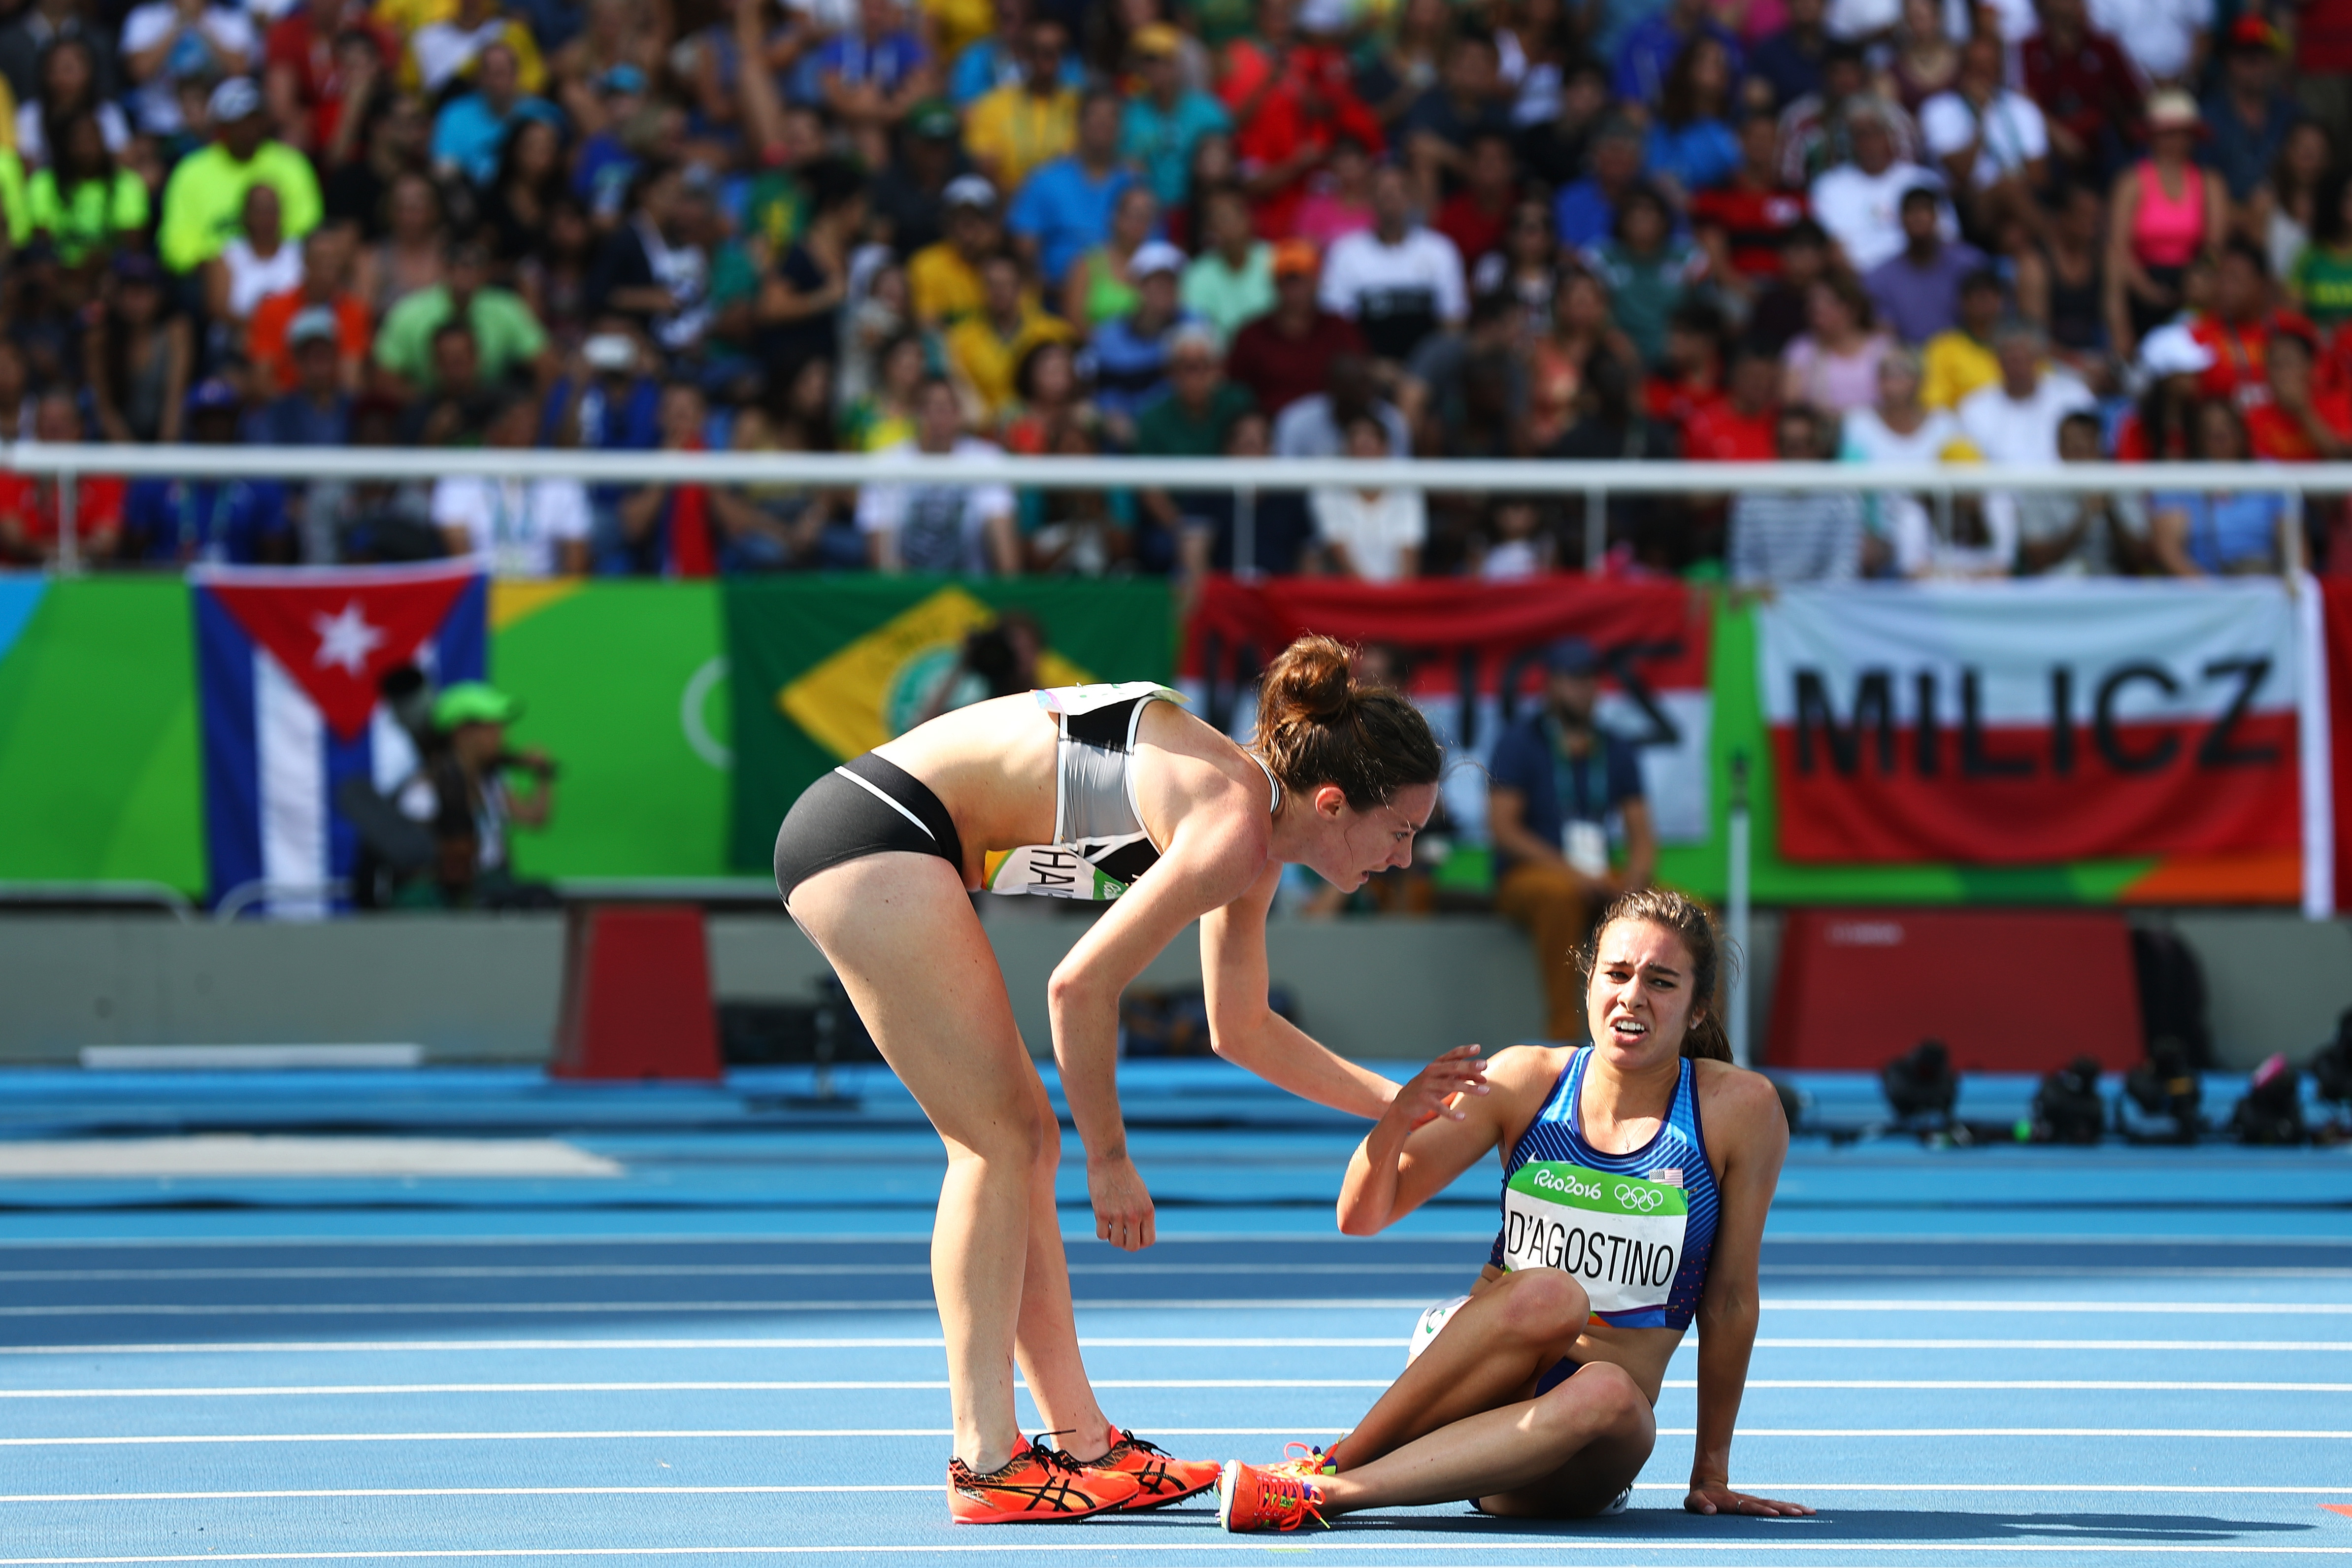 RIO DE JANEIRO, BRAZIL - AUGUST 16:  Abbey D'Agostino of the United States (R) is assisted by Nikki Hamblin of New Zealand after a collision during the Women's 5000m Round 1 - Heat 2 on Day 11 of the Rio 2016 Olympic Games at the Olympic Stadium on August 16, 2016 in Rio de Janeiro, Brazil.  (Photo by Ian Walton/Getty Images)